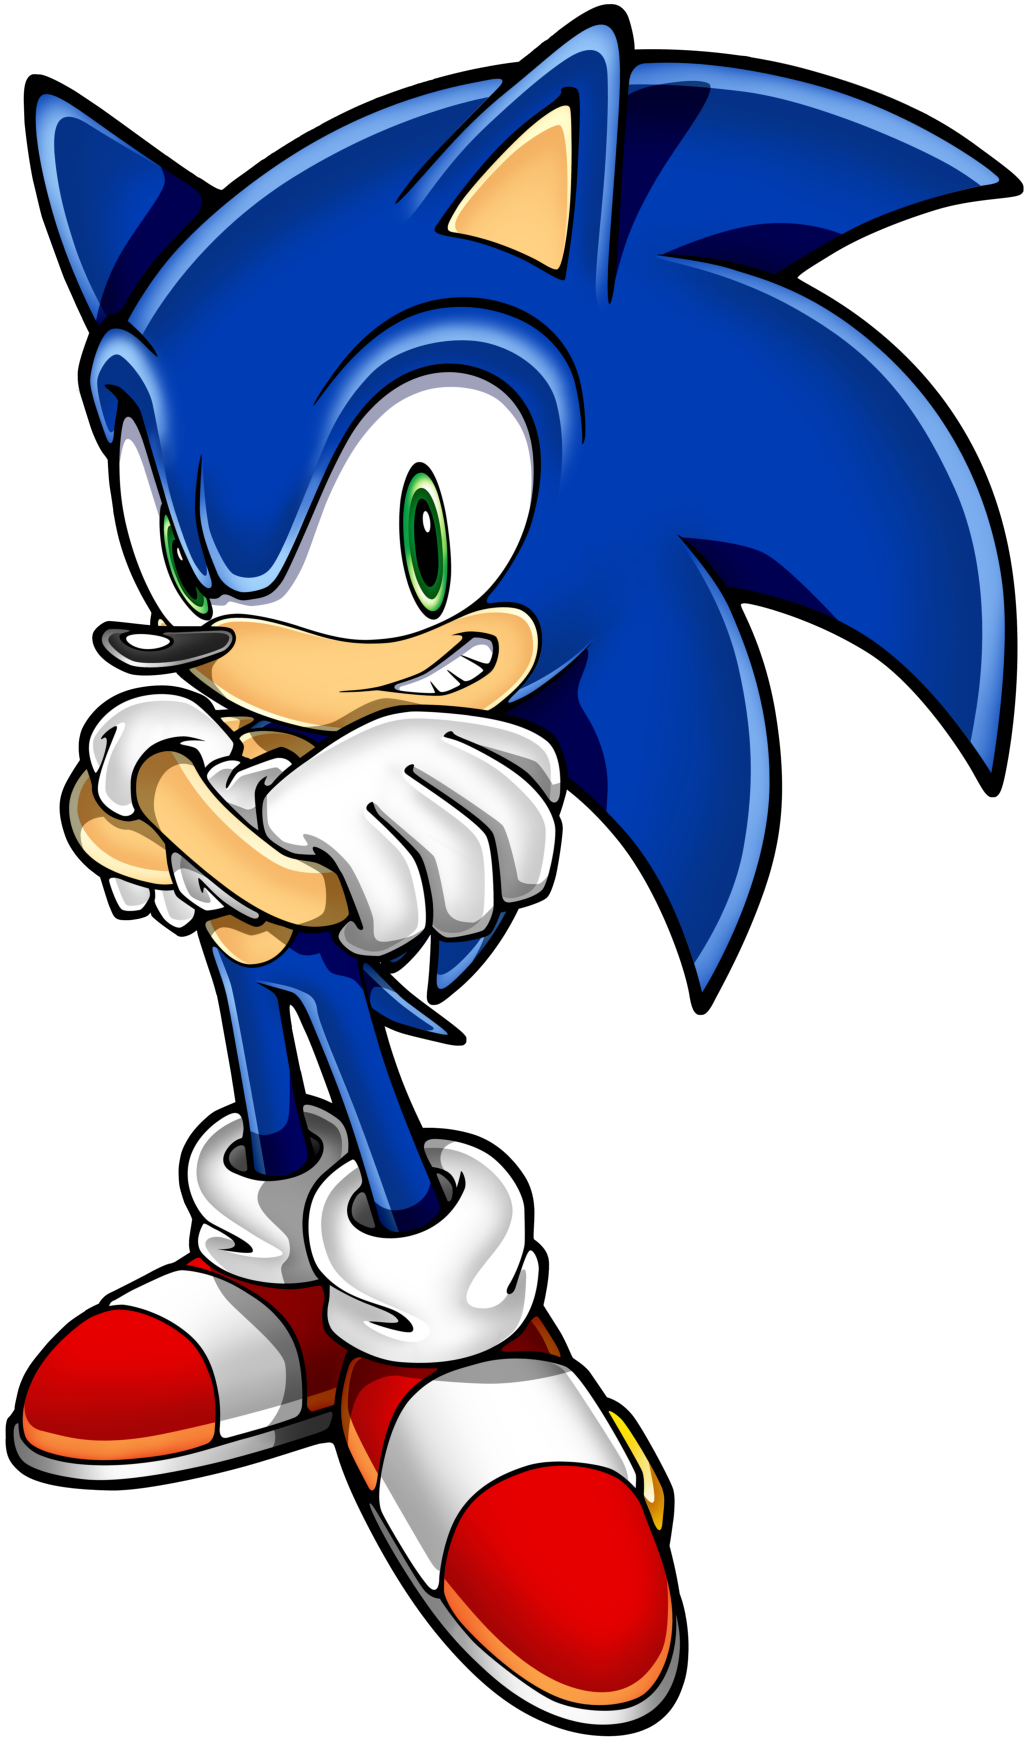 Sonic The Hedgehog Png - Sonic The Hedgehog Png 11 Png Image, Transparent background PNG HD thumbnail